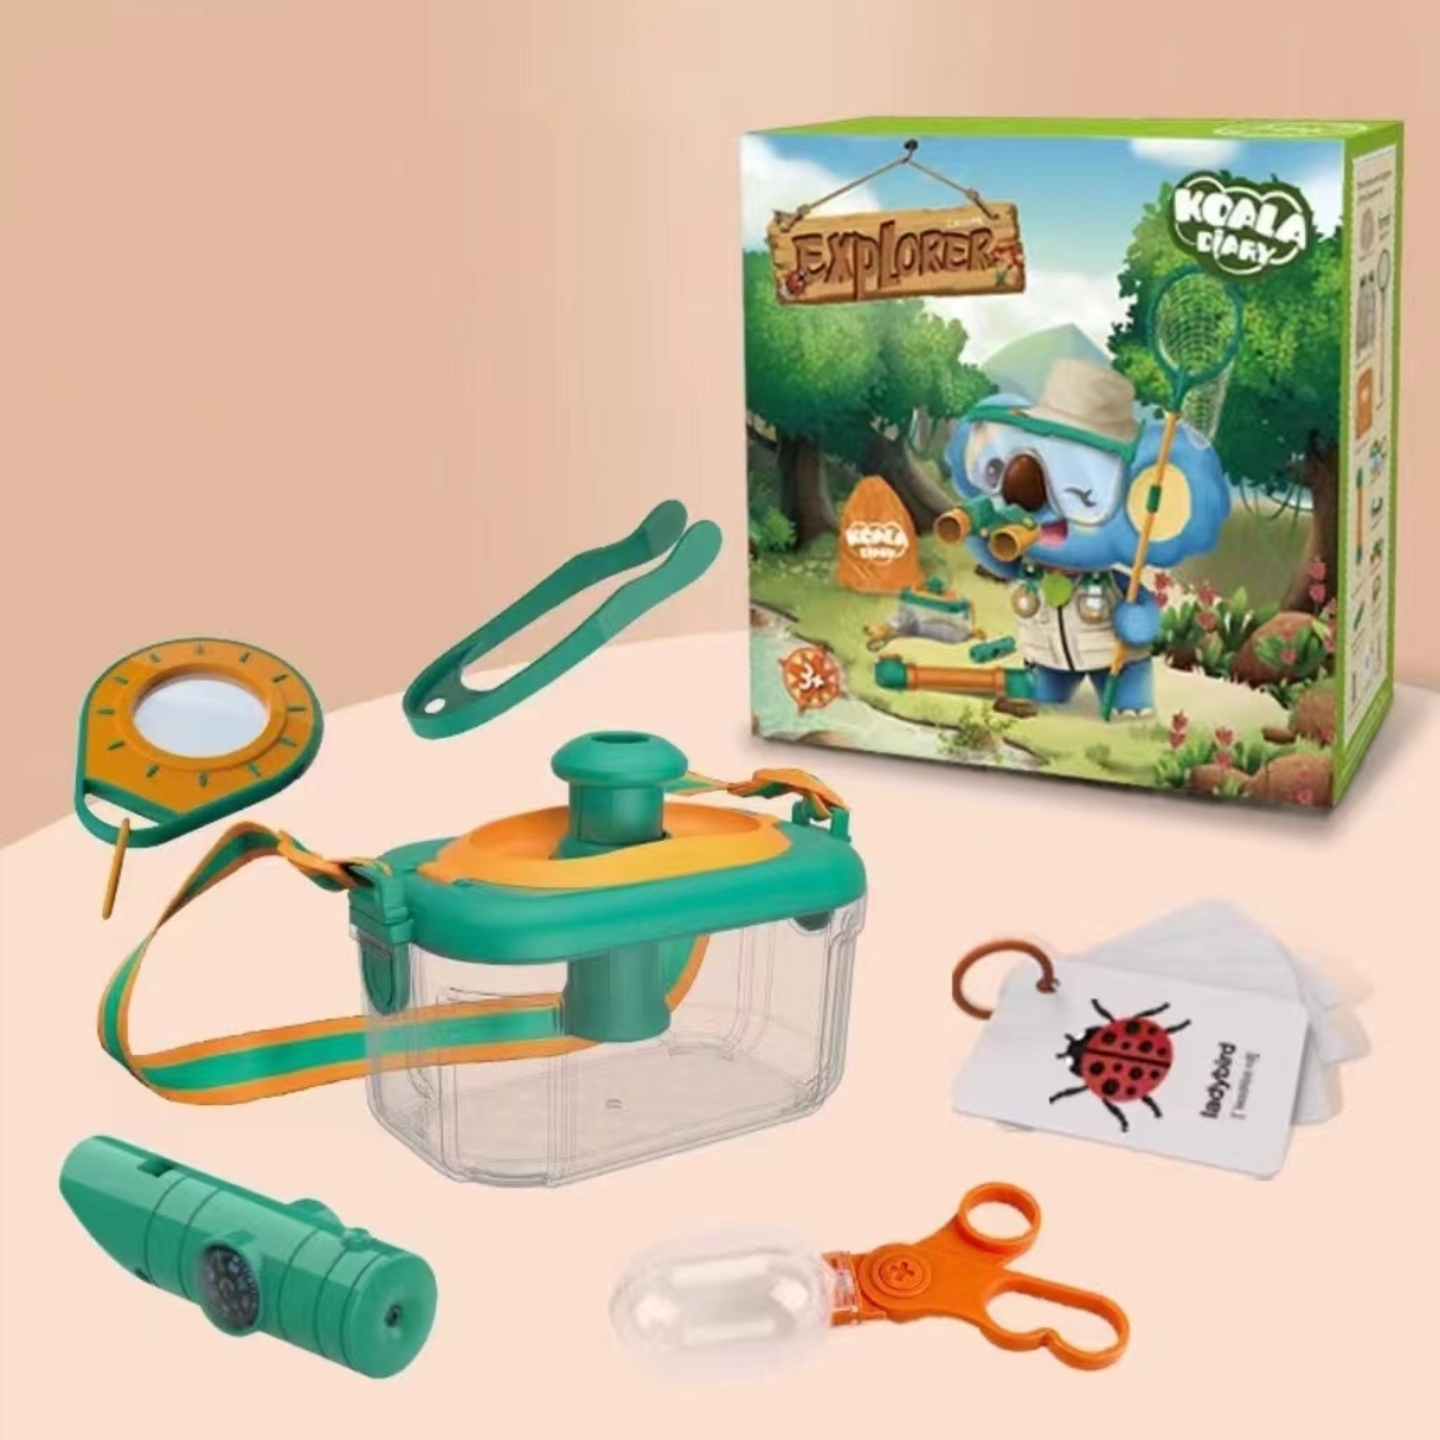 Nature Explorer 6 in 1 Set for Kids includes bug container, clamp, magnifier, whistle and compass